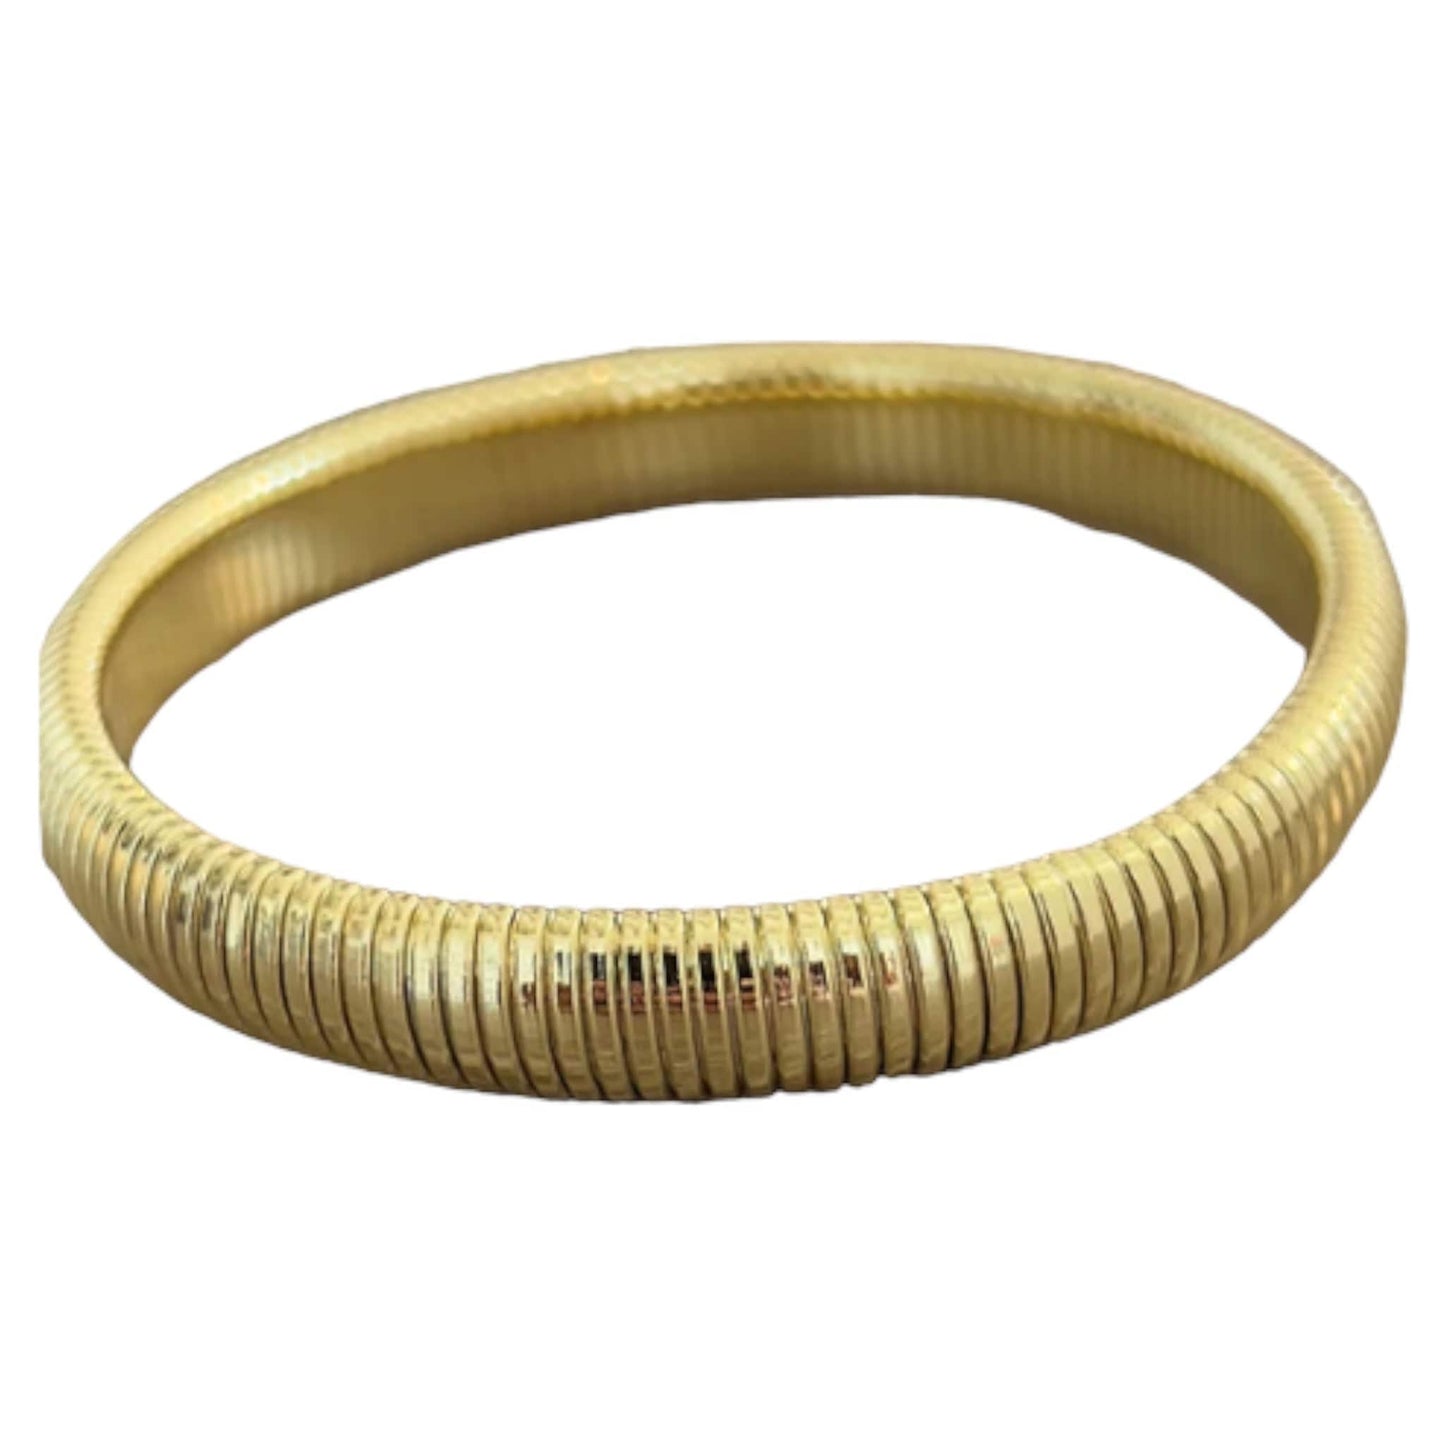 10MM Cobra Bangle Bracelet - Gold and Silver available